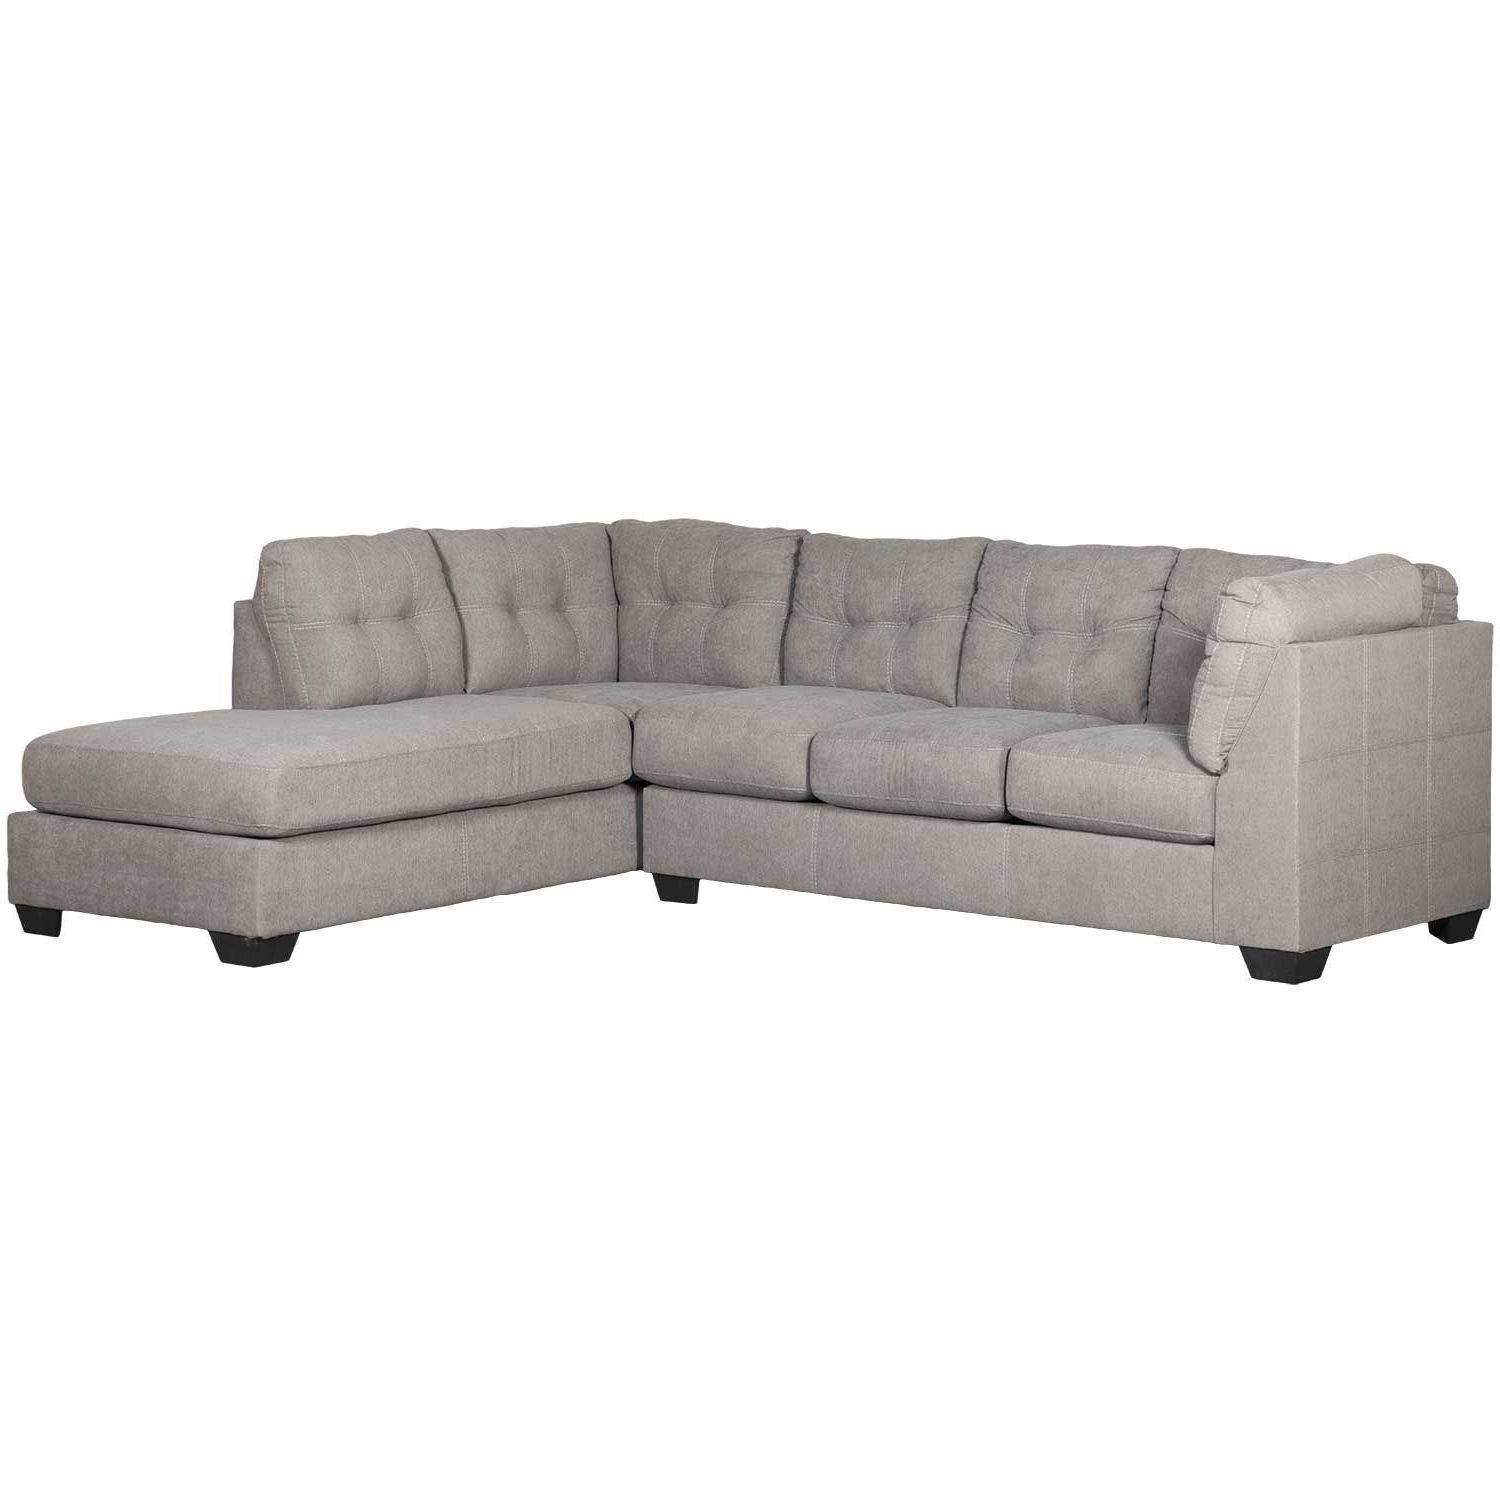 Maier Charcoal 2 Piece Sectional With Raf Chaise Inside Well Known 2pc Burland Contemporary Sectional Sofas Charcoal (View 11 of 25)